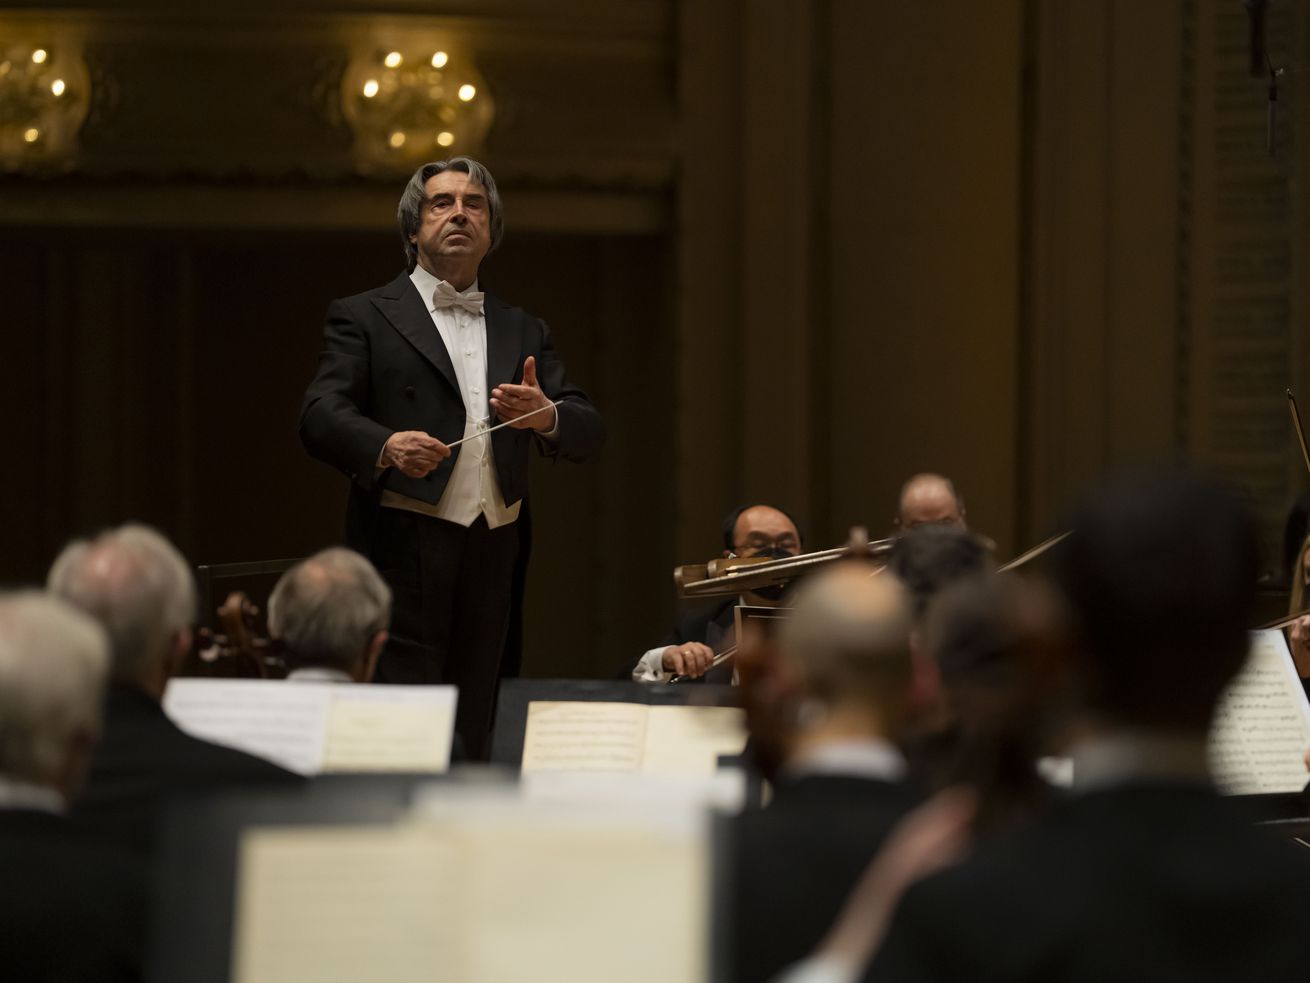 Maestro Riccardo Muti leads the Chicago Symphony Orchestra in an all-Beethoven program on Thursday night at Symphony Center.